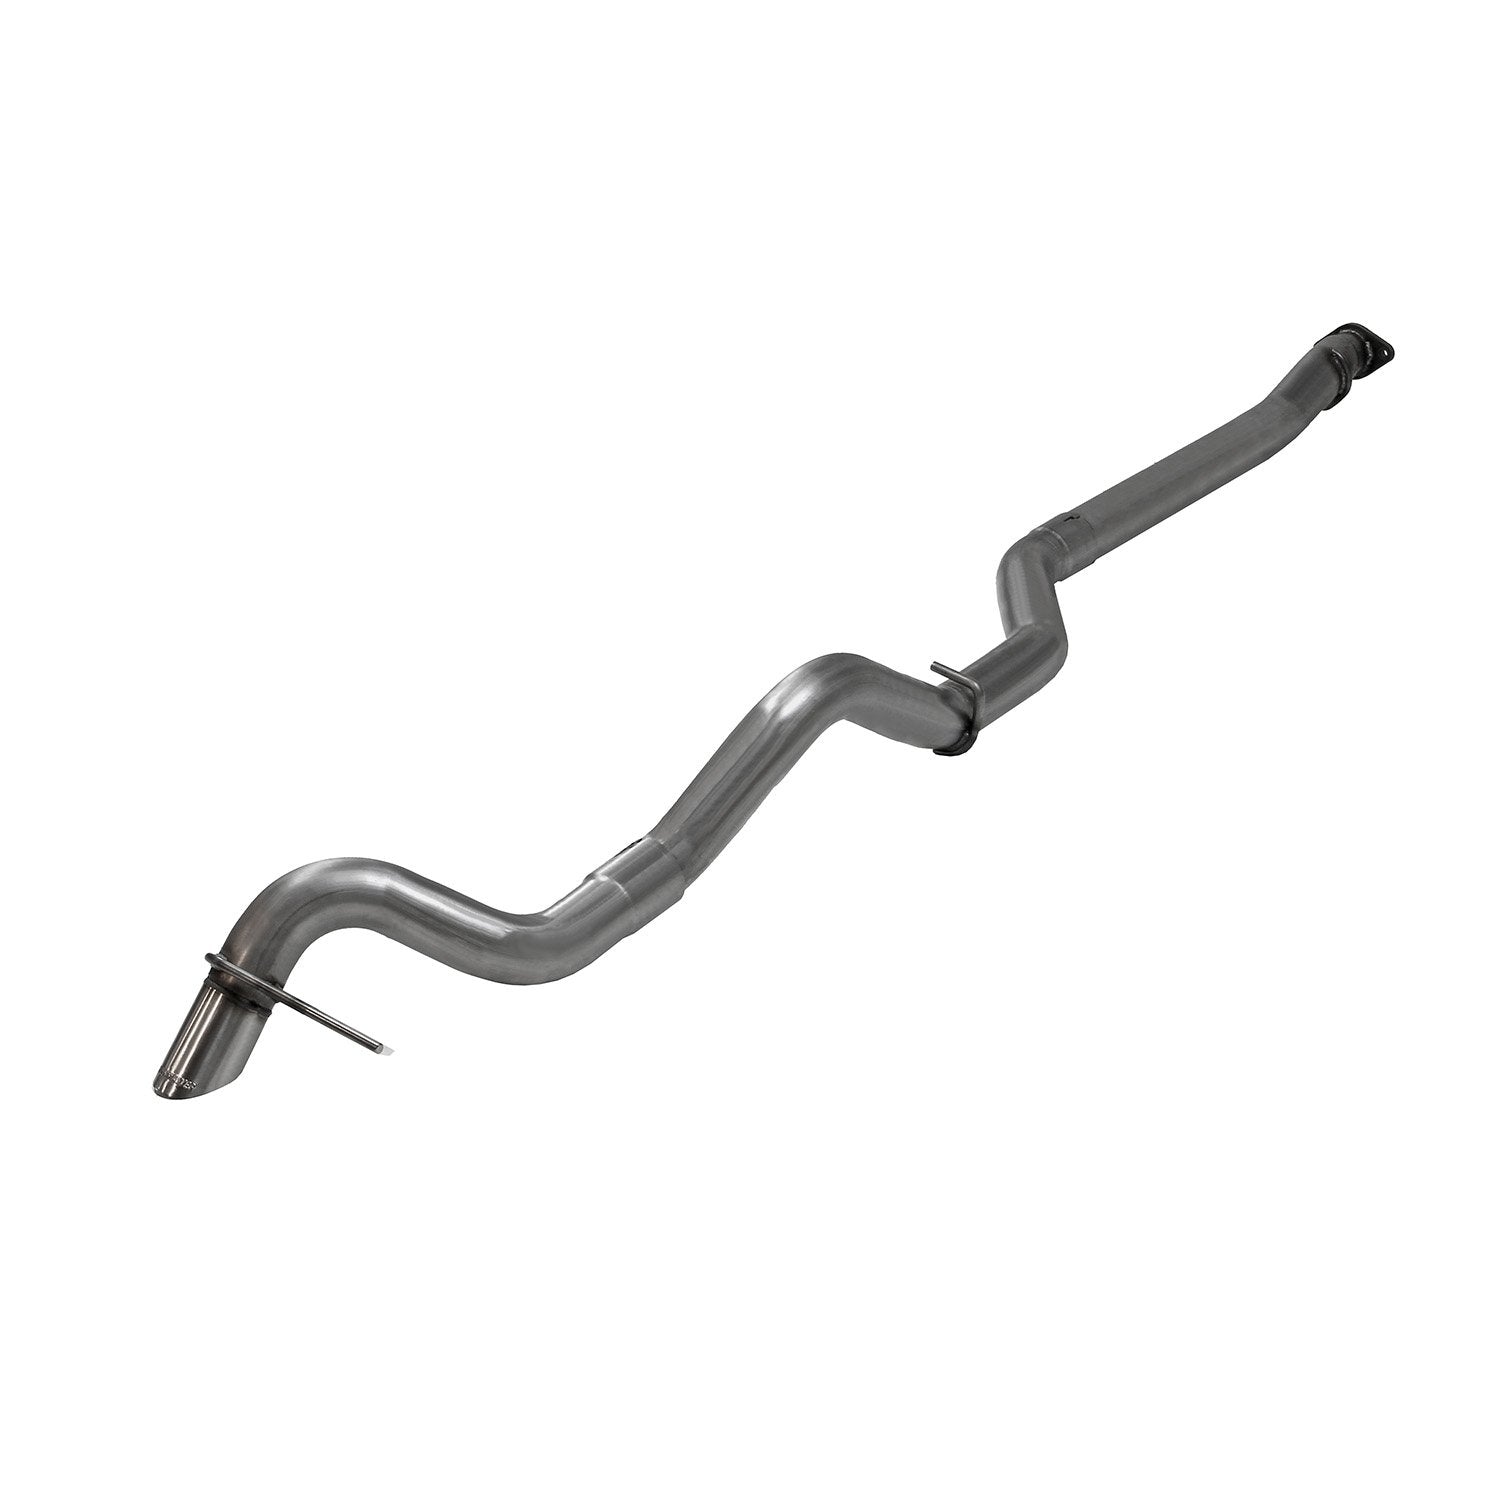 Flowmaster 818145 Outlaw Cat Back Exhaust System